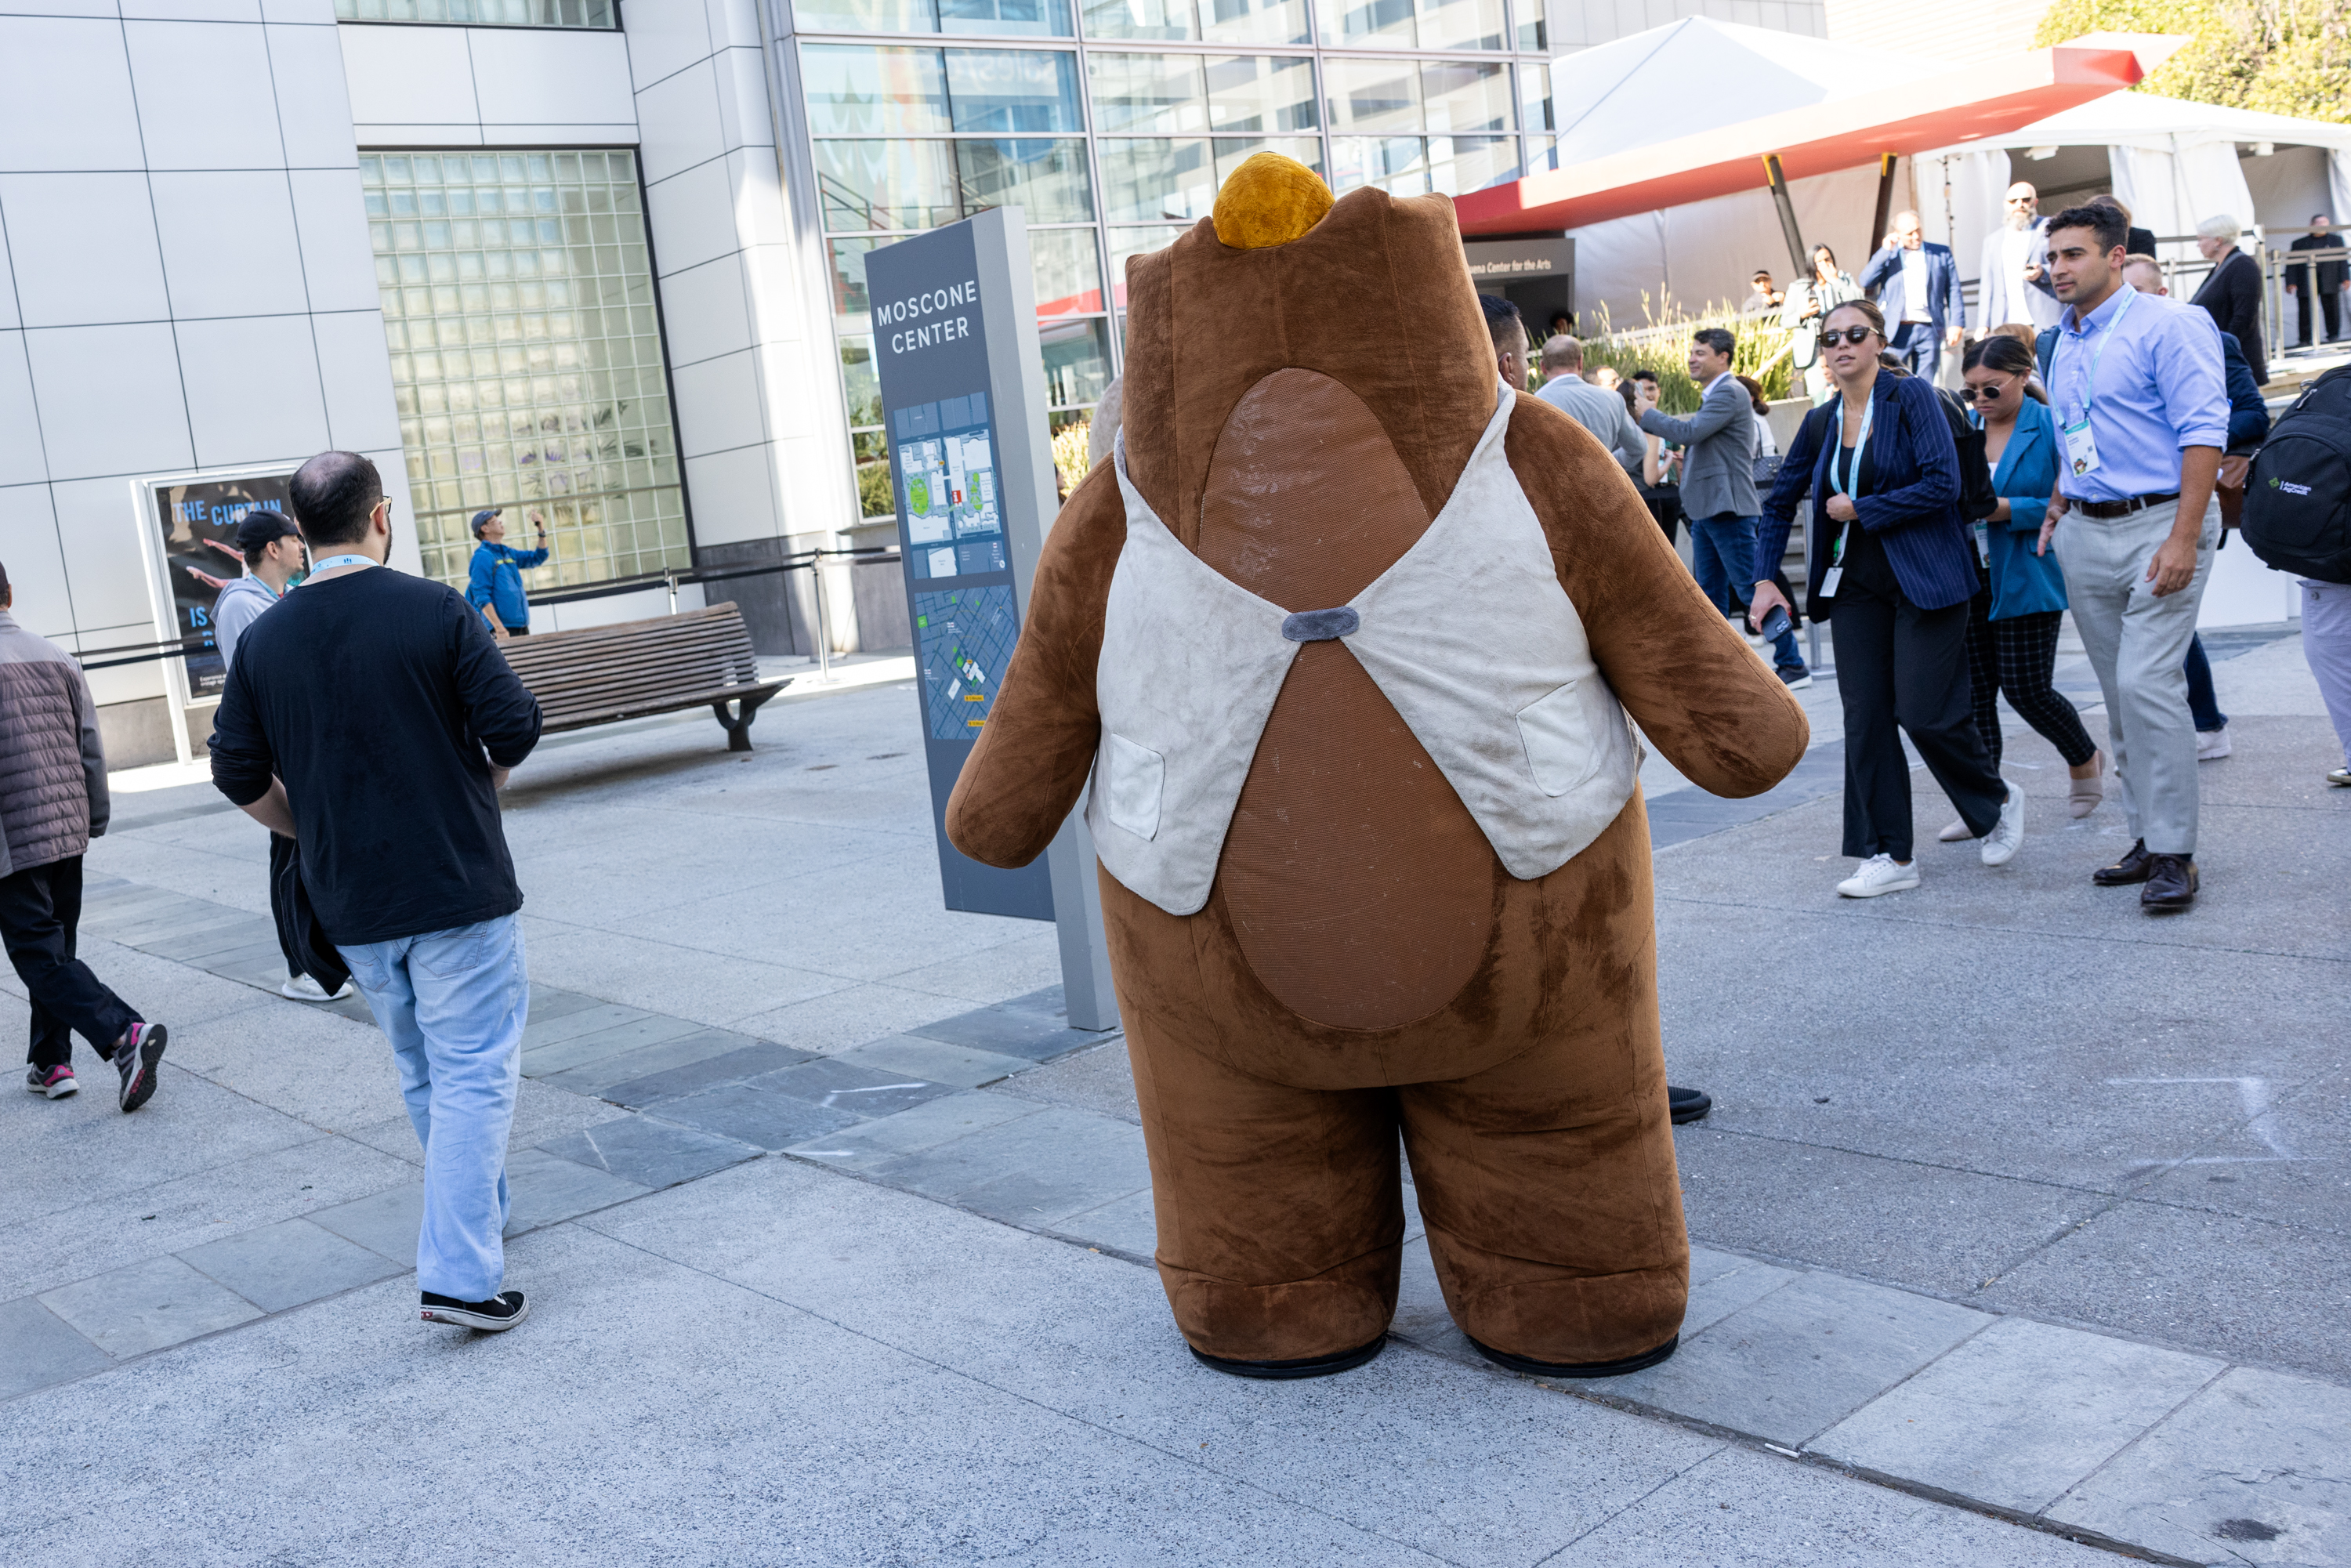 Salesforce Sells Weird Merch at Its Conference. And Yes, People Buy It